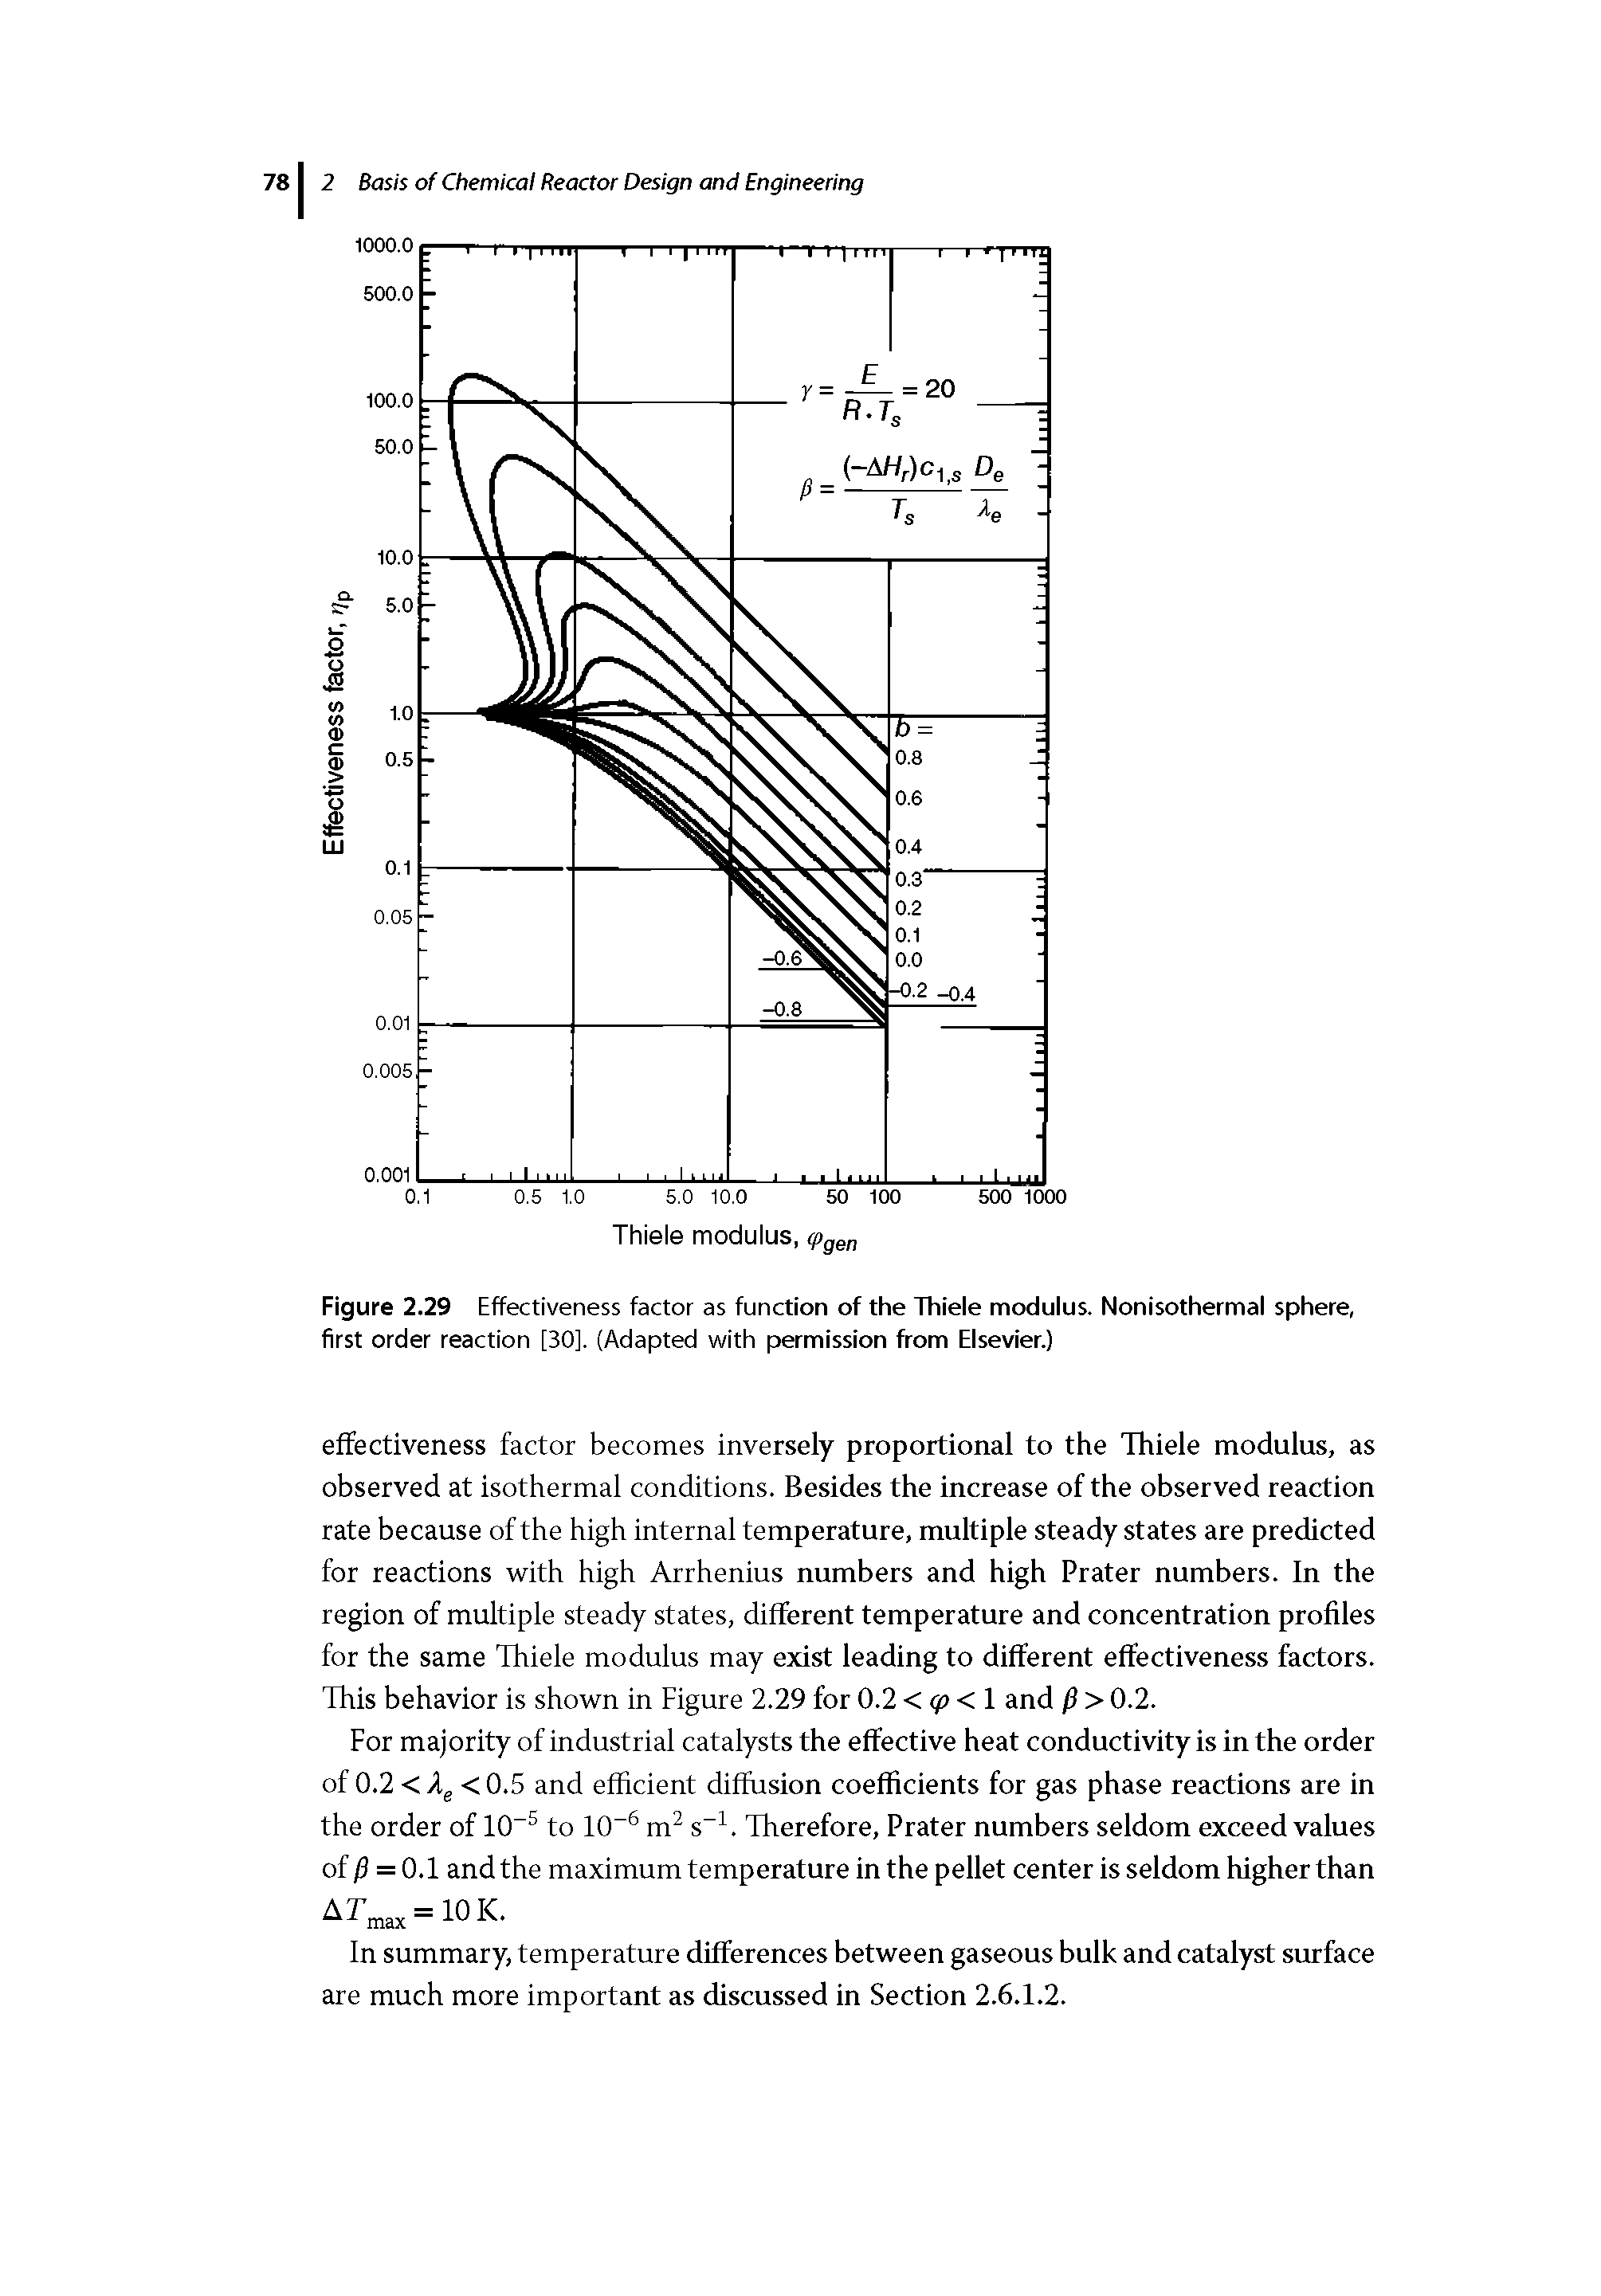 Figure 2.29 Effectiveness factor as function of the Thiele modulus. Nonisothermal sphere, first order reaction [30]. (Adapted with permission from Elsevier.)...